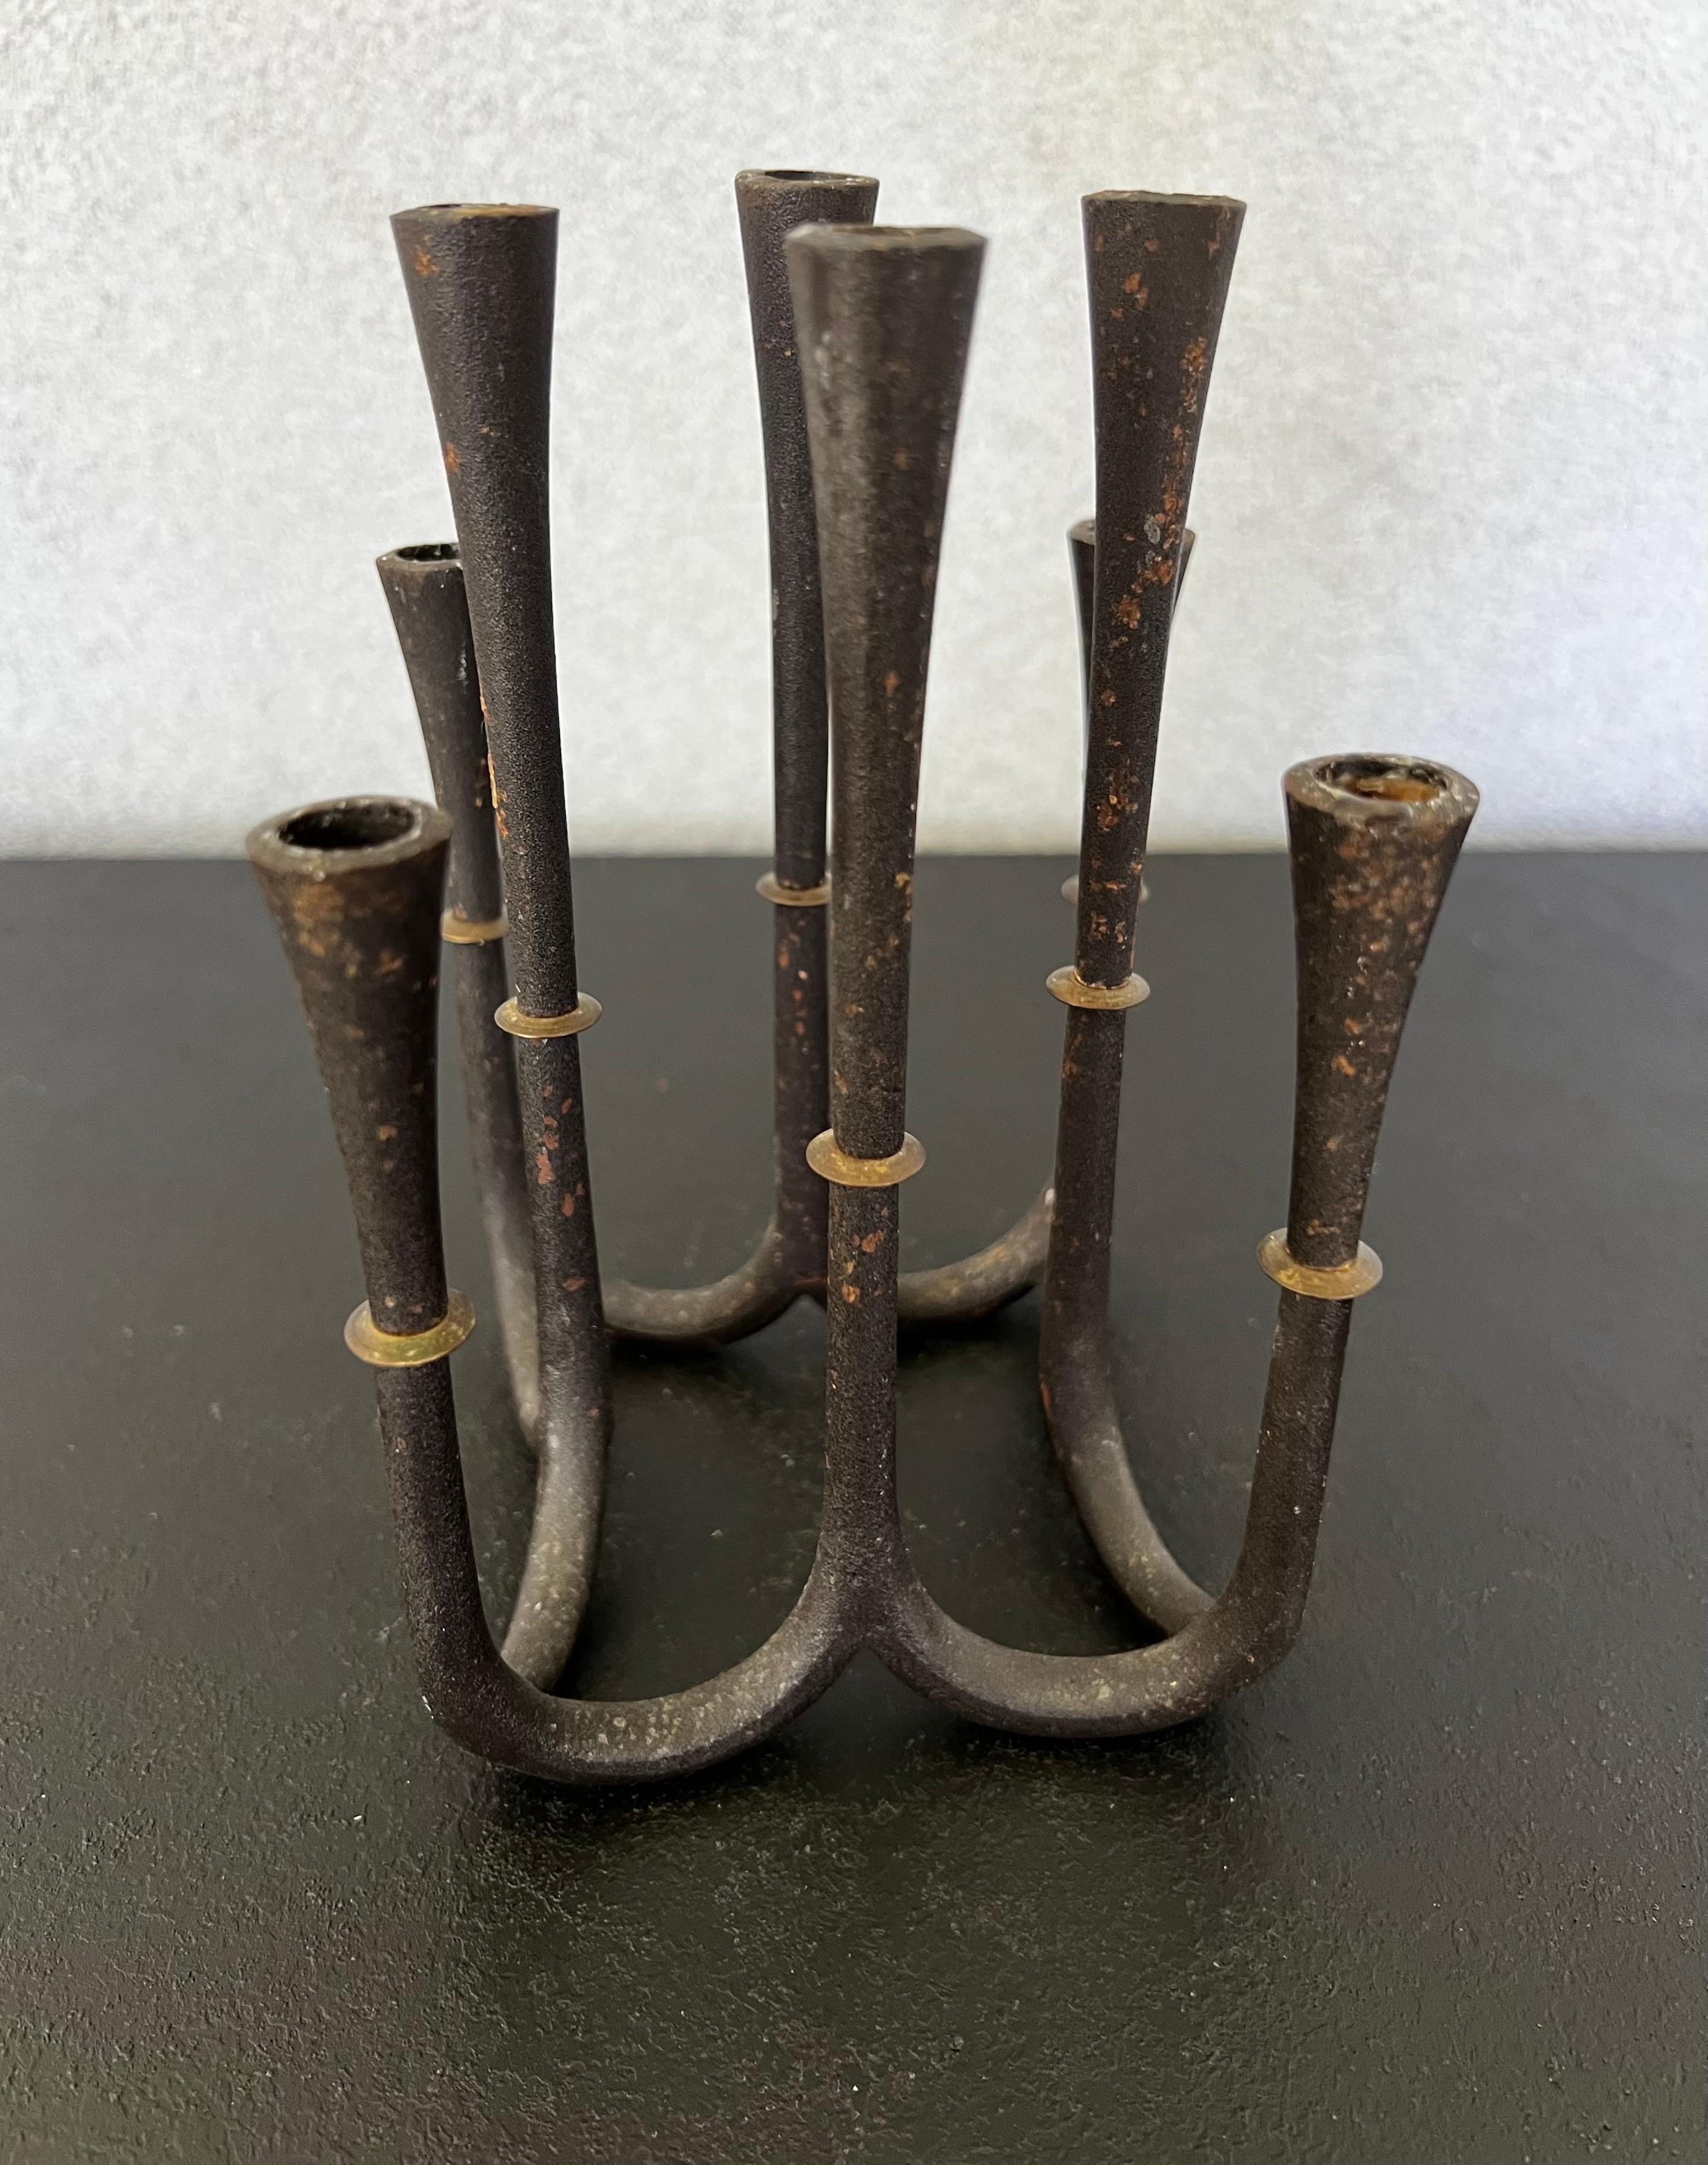 Mid-Century modern candelabra by Jens Quistgaard for Dansk. Features solid cast iron with brass accents, holds eight candles. Made in Denmark circa 1960s
Beautiful Design to be considered a world of art 